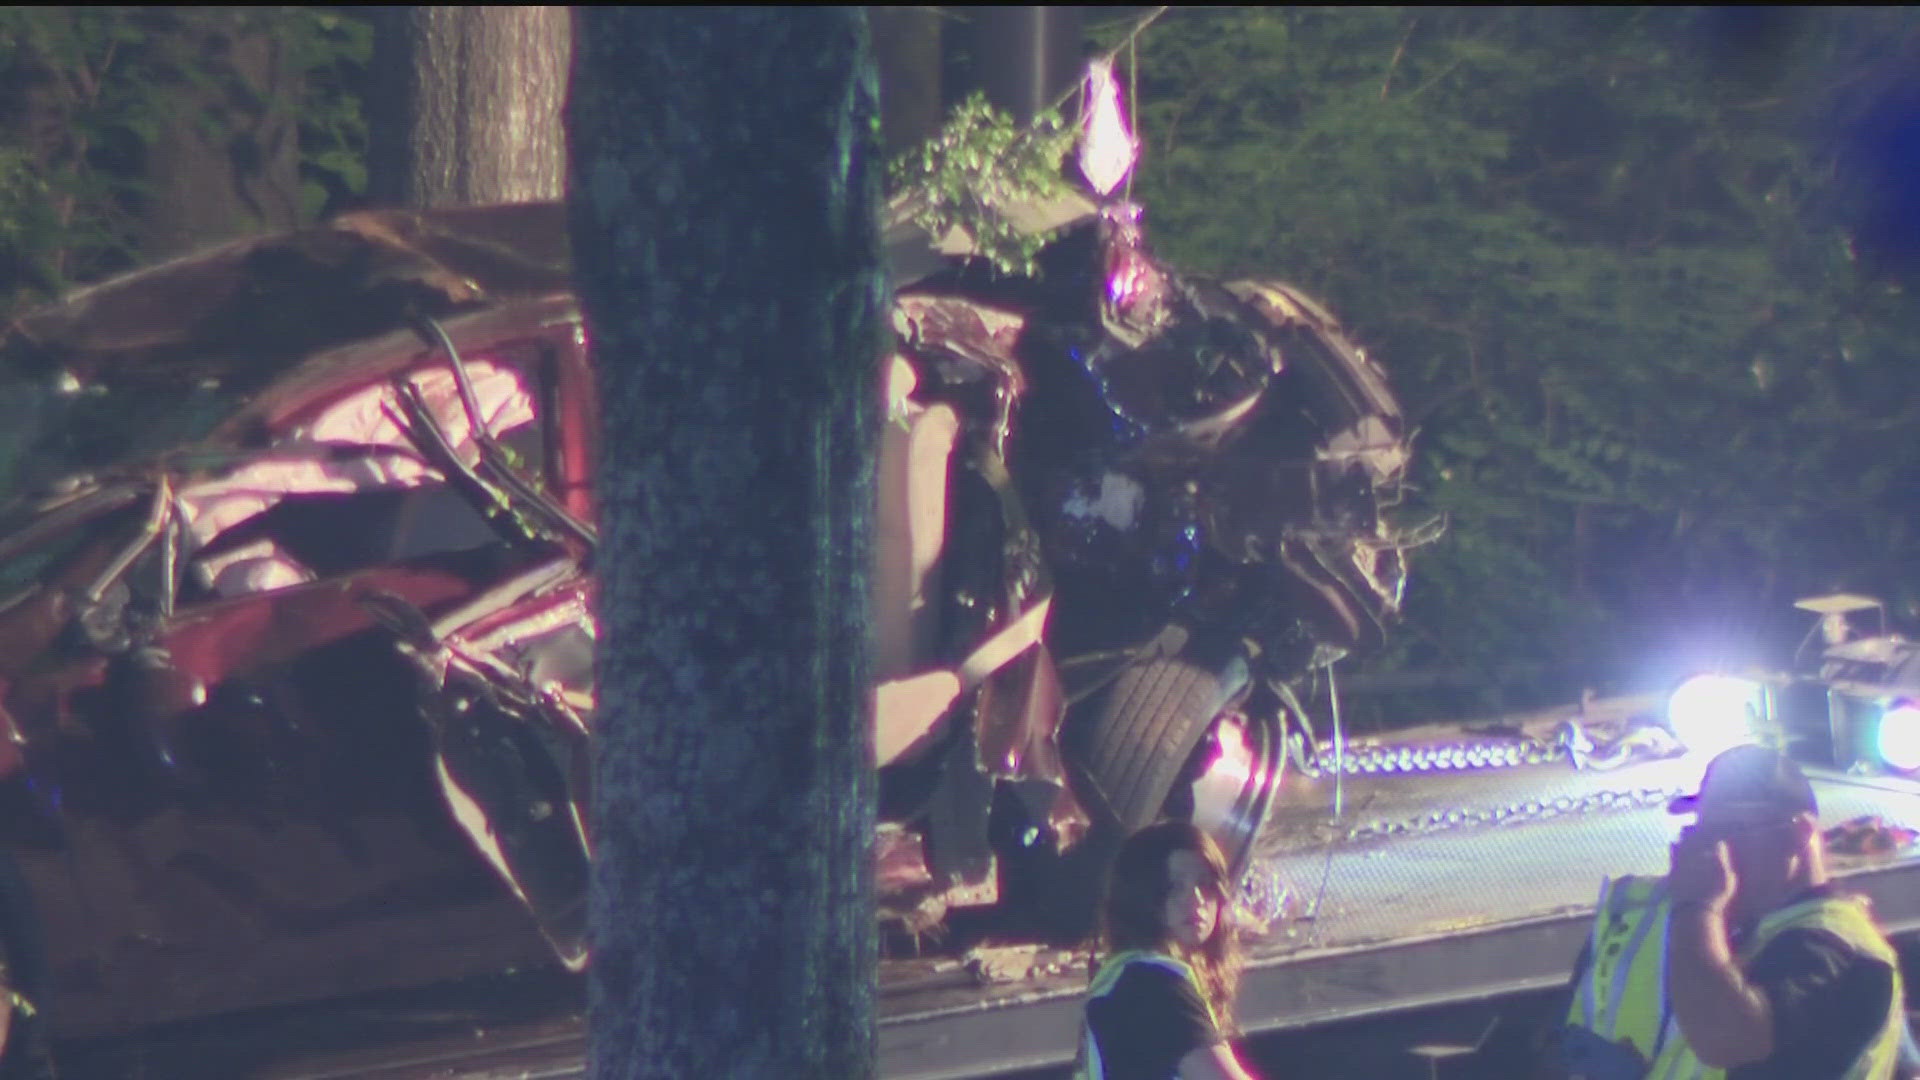 Alpharetta authorities said there were five people in the car; three victims have died.